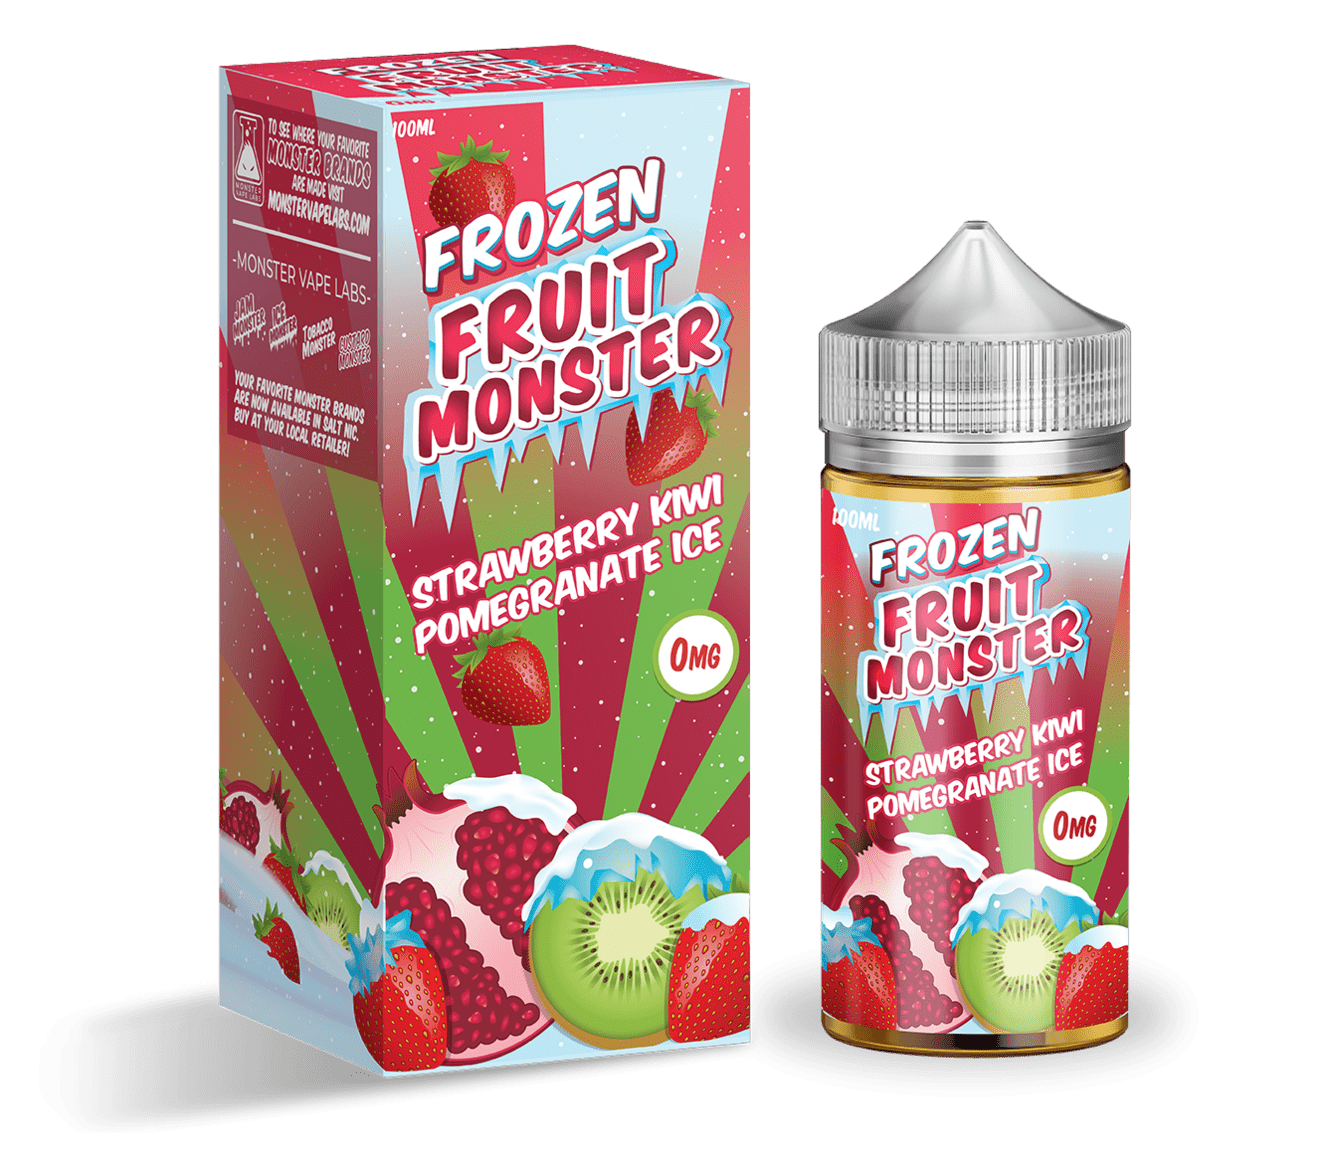 Buy Strawberry Kiwi Pomegranate Ice by Frozen Fruit Monster Ejuice - Wick And Wire Co Melbourne Vape Shop, Victoria Australia